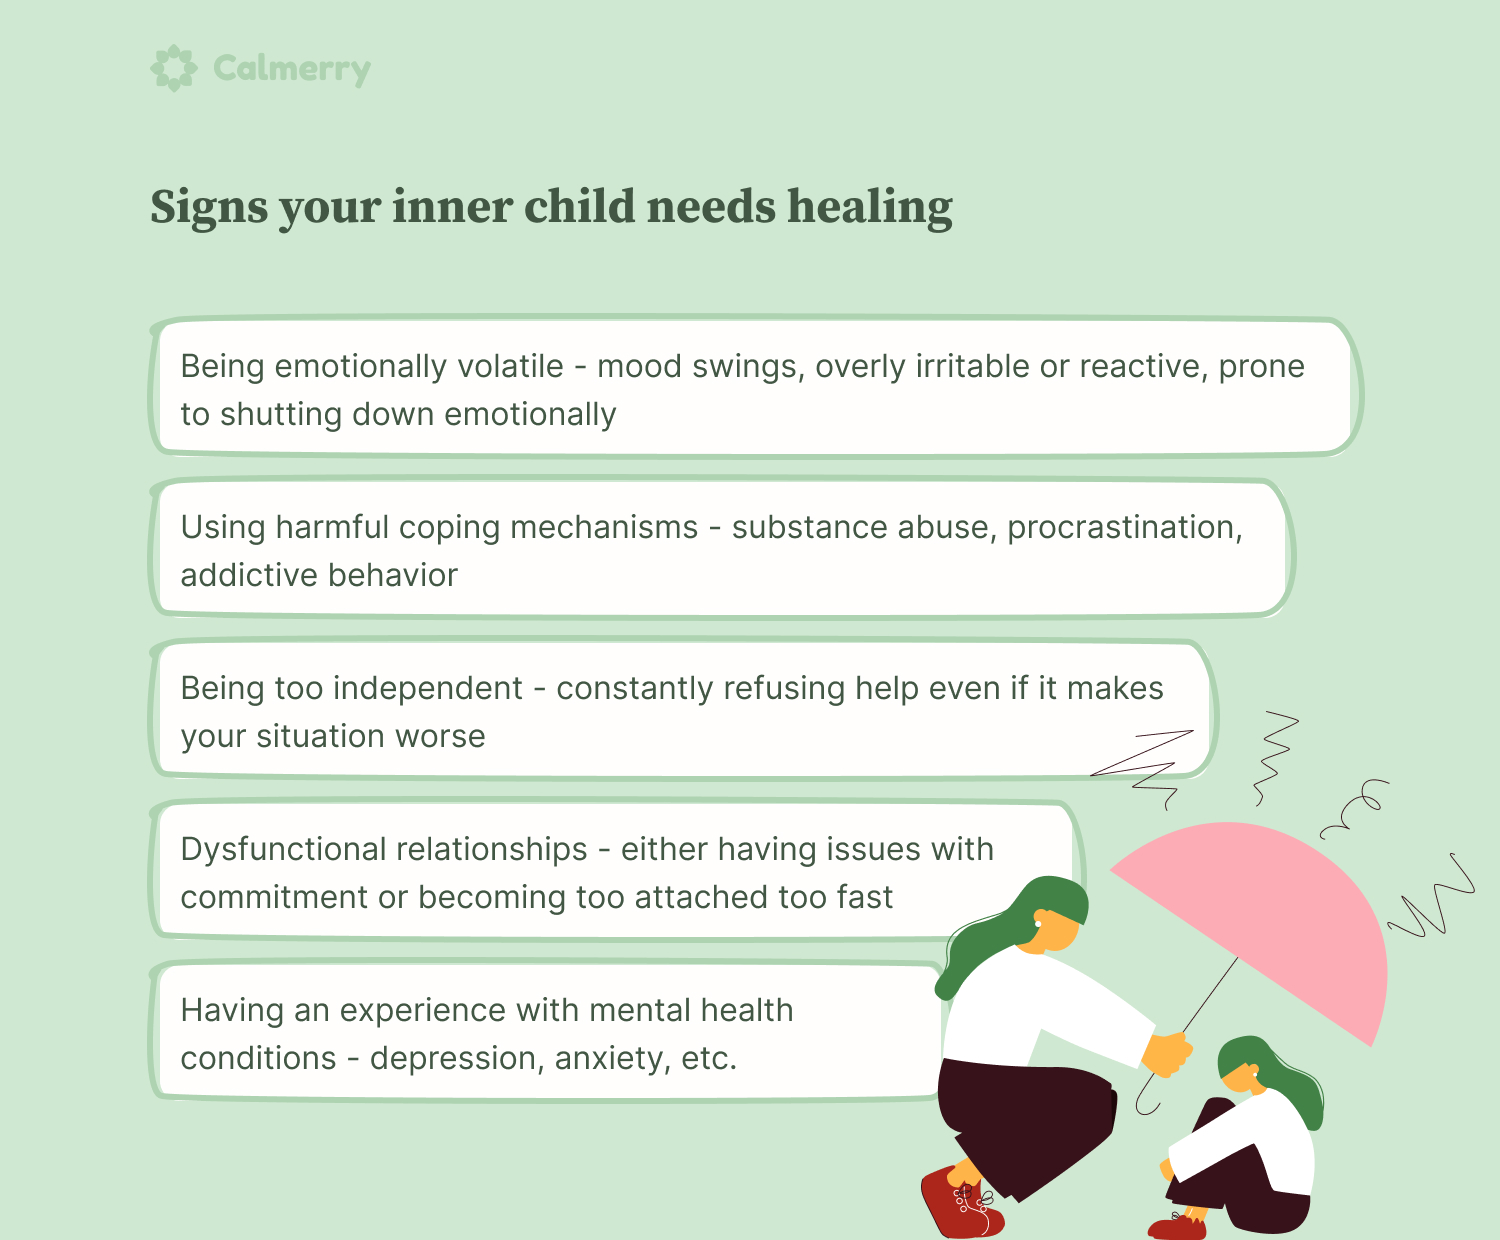 There are a few signs indicating that your inner child needs healing. These may include being emotionally volatile or overly independent